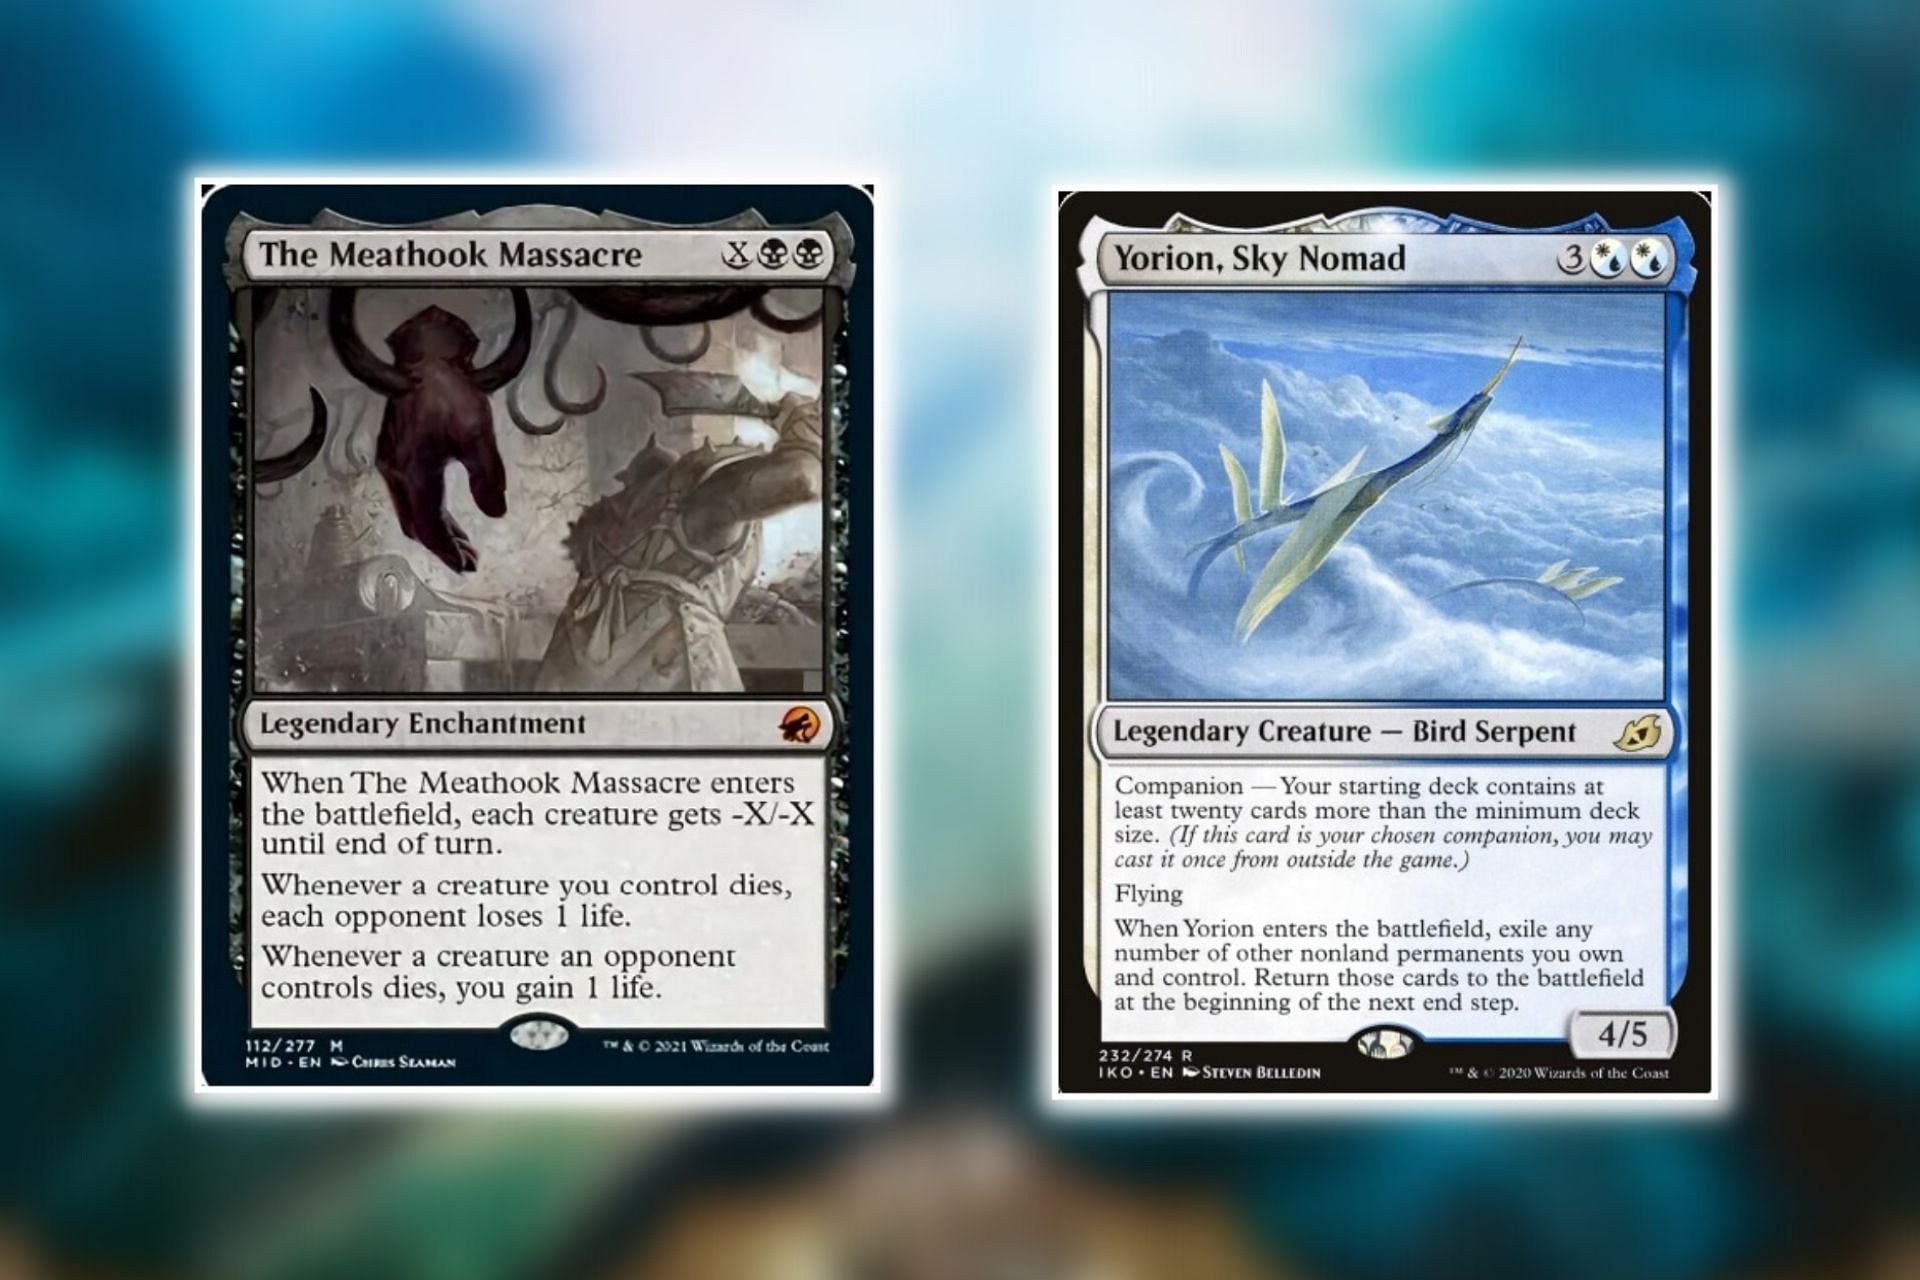 Magic The Gathering hands out two major bans for Standard and Modern